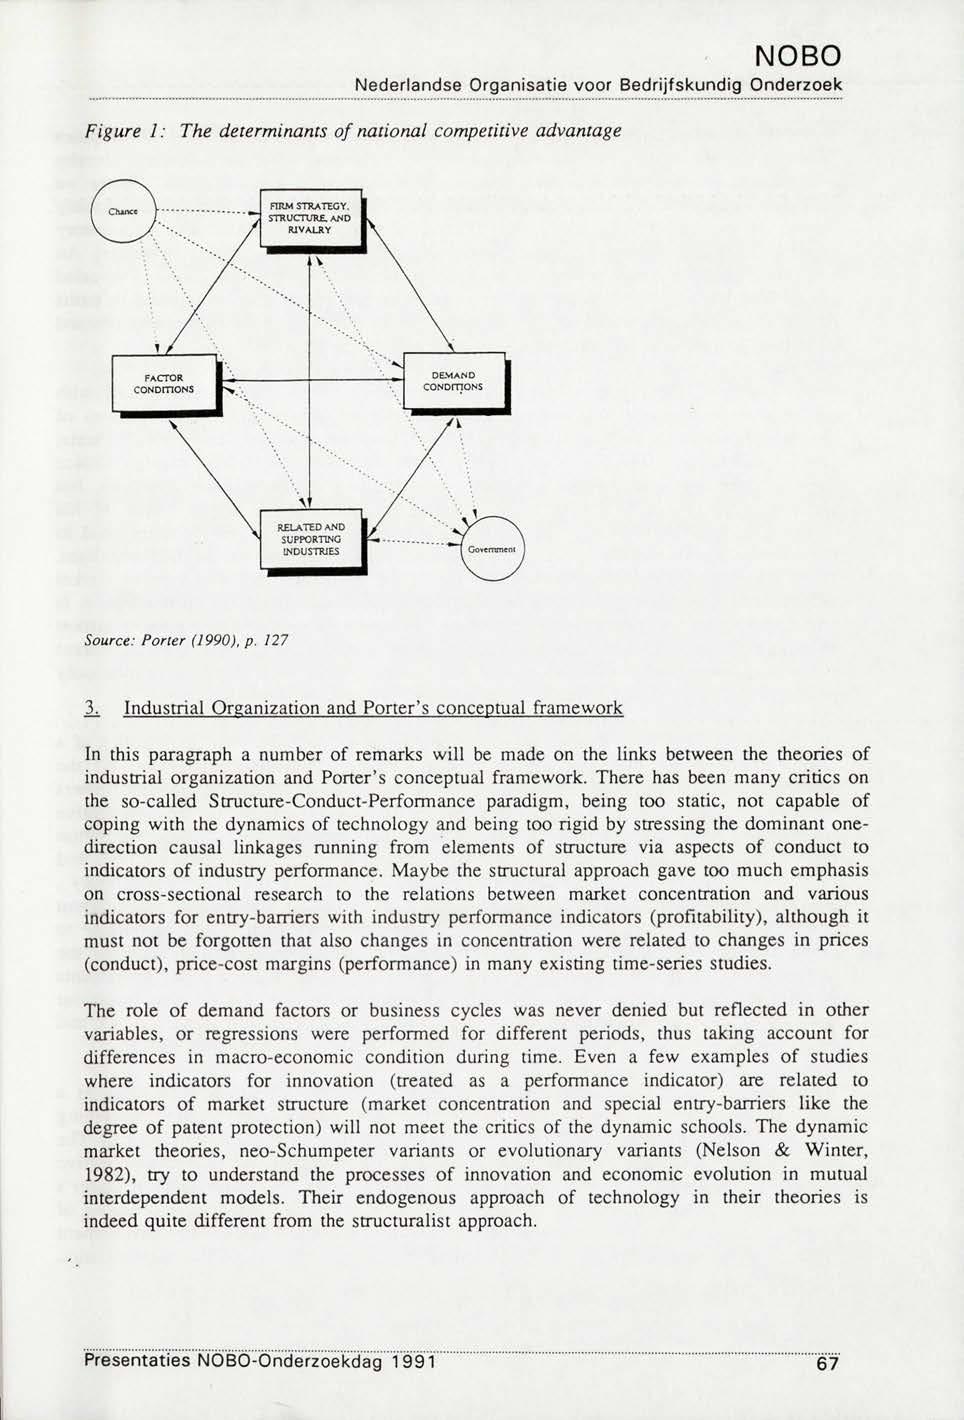 Figure 1: The determinants of national competitive advantage FIRM STRATEGY. STRUCTURE. AND RIVALRY RELATED AND SUPPORTING INDUSTRIES Source: Porter (1990), p.